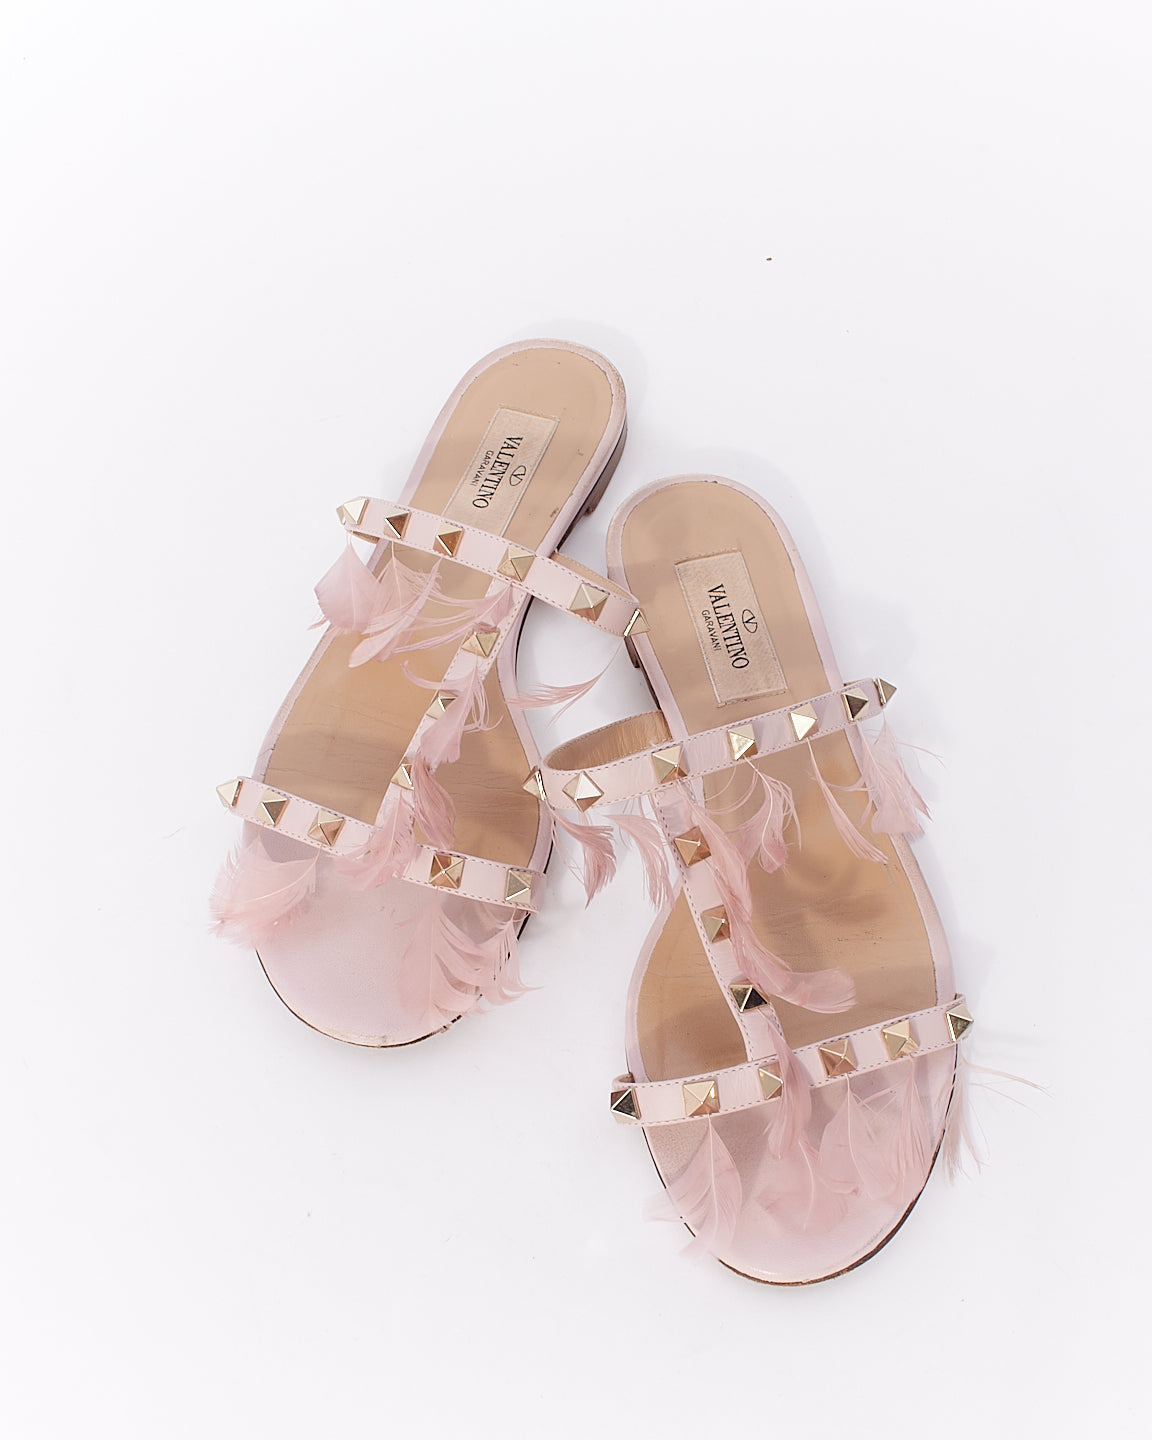 Valentino Pink Rockstud Sandals with Feathers - 37